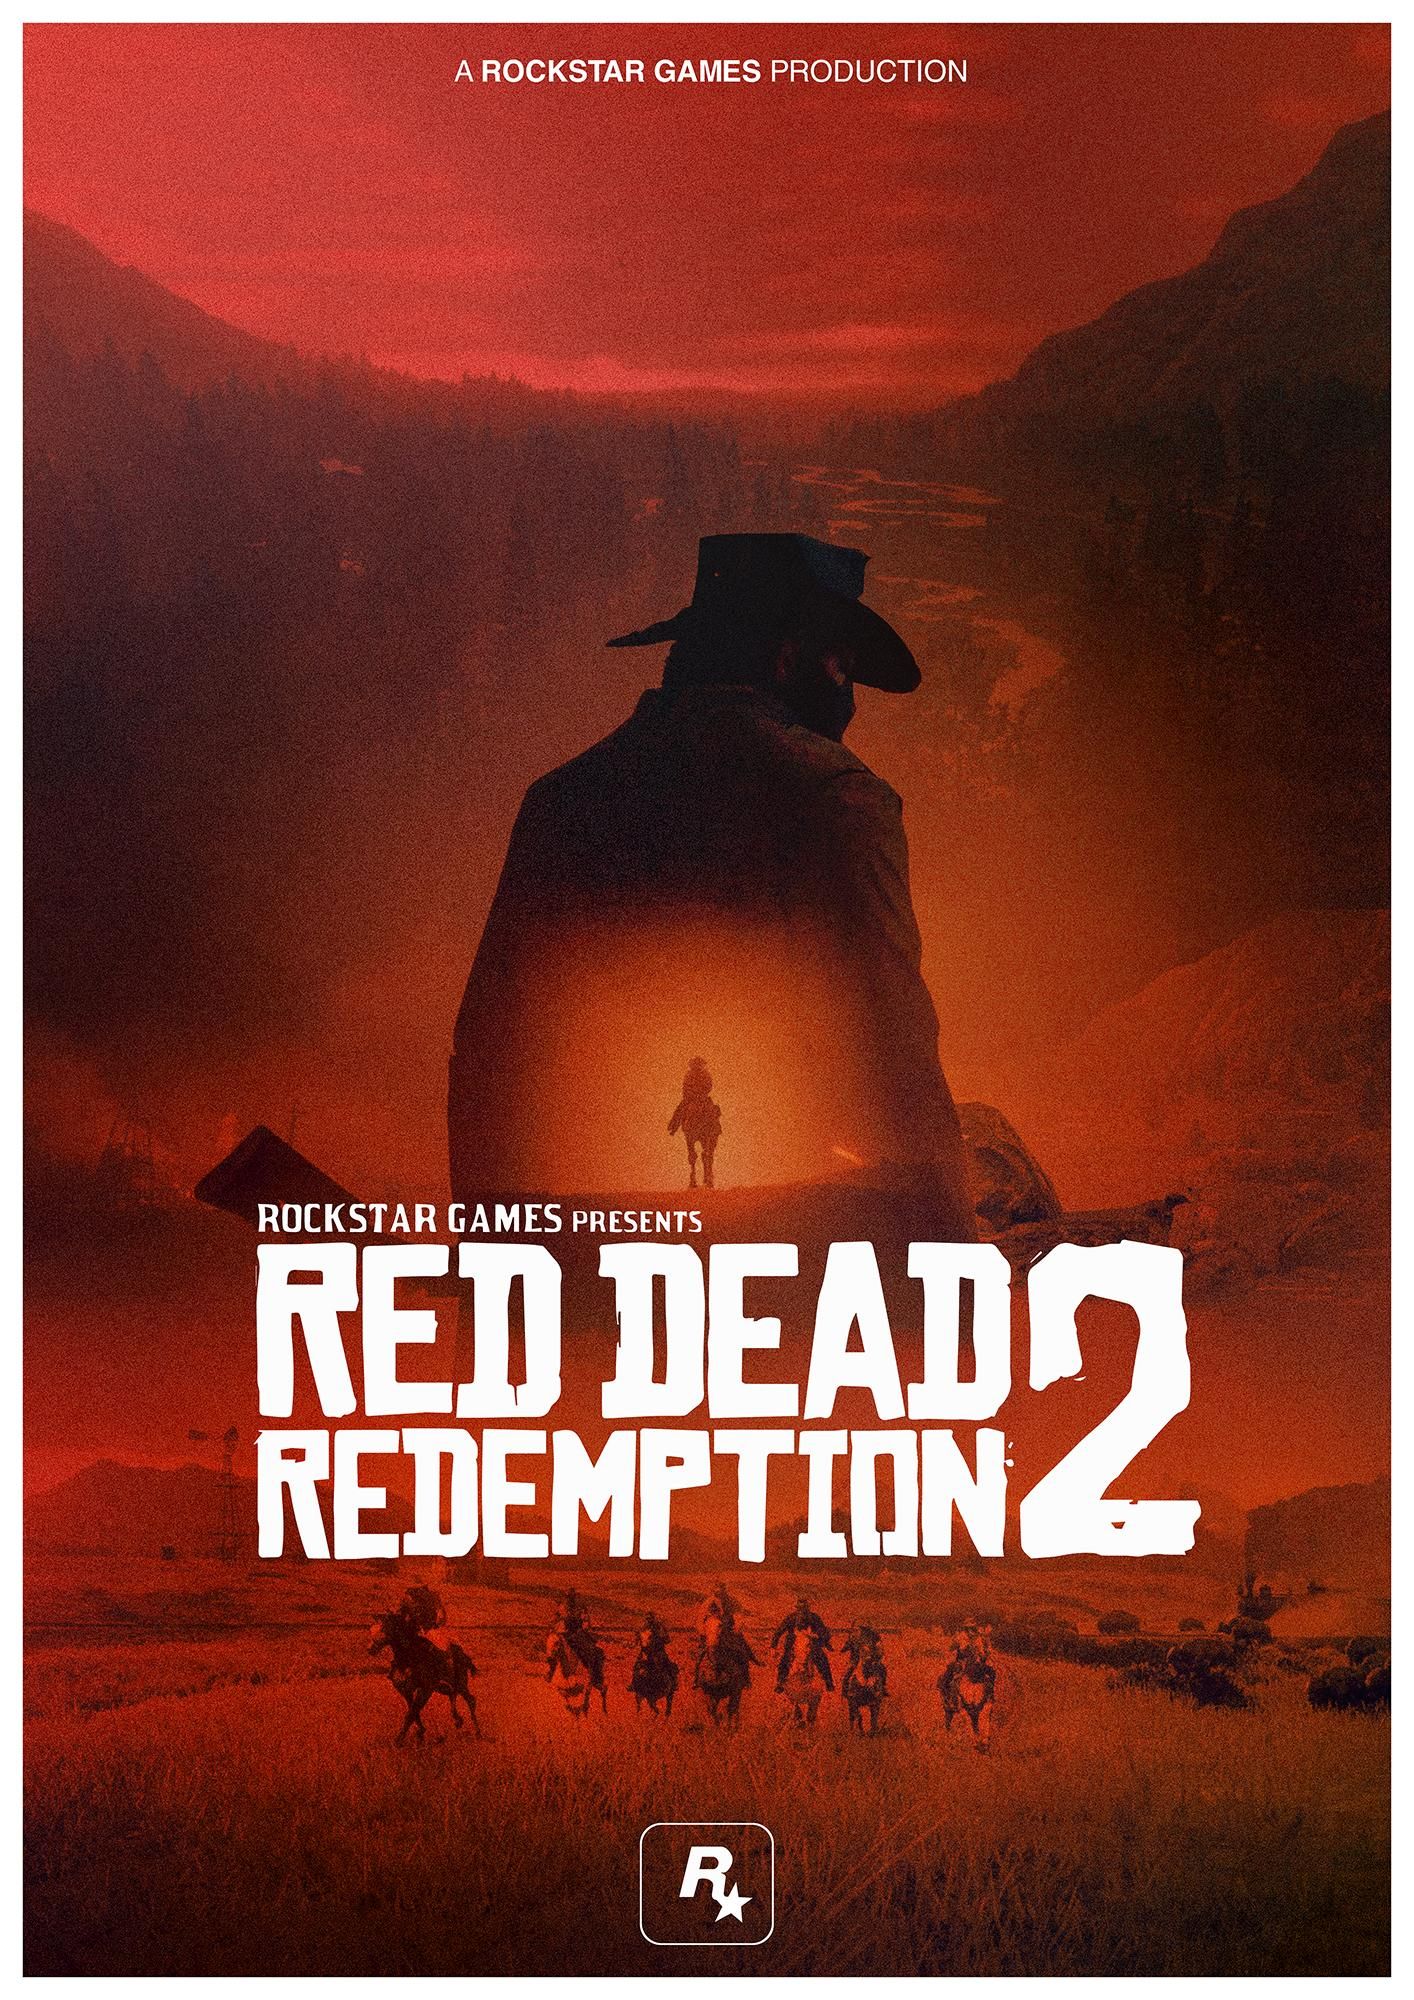 Made a poster using scenes from the RDR2 trailer